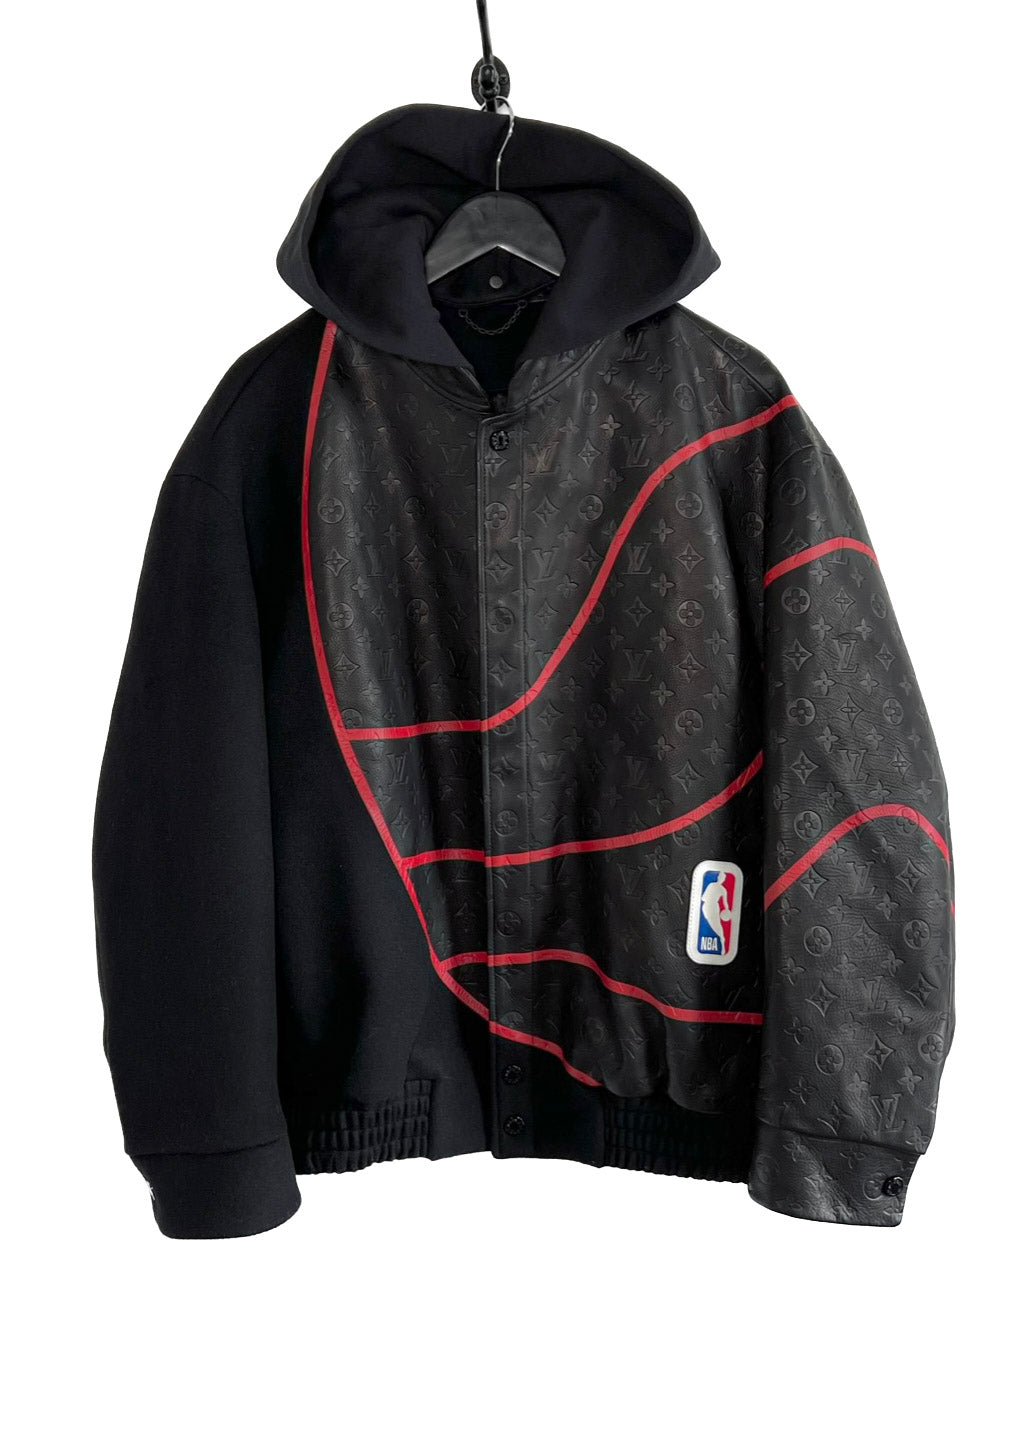 Louis Vuitton x NBA - Authenticated Jacket - Leather Black for Women, Never Worn, with Tag